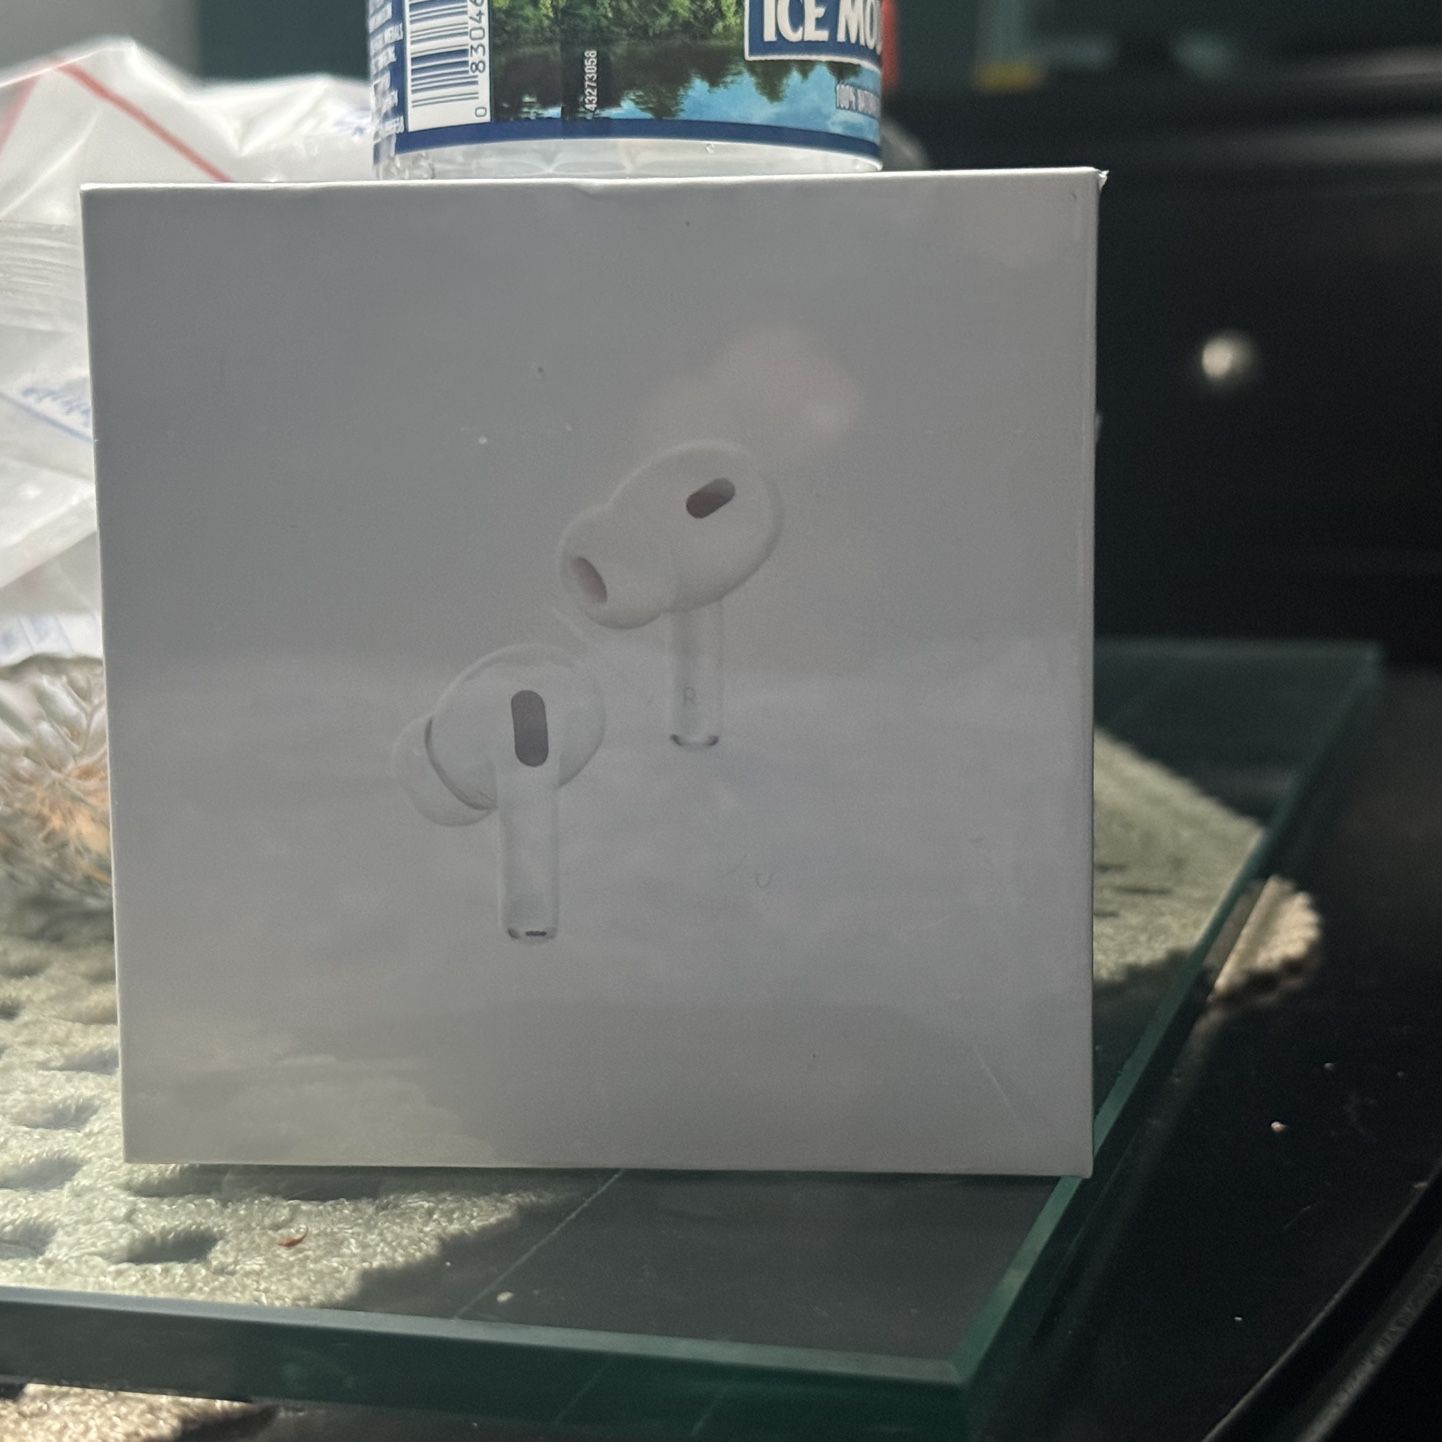 AirPods Pros 2 